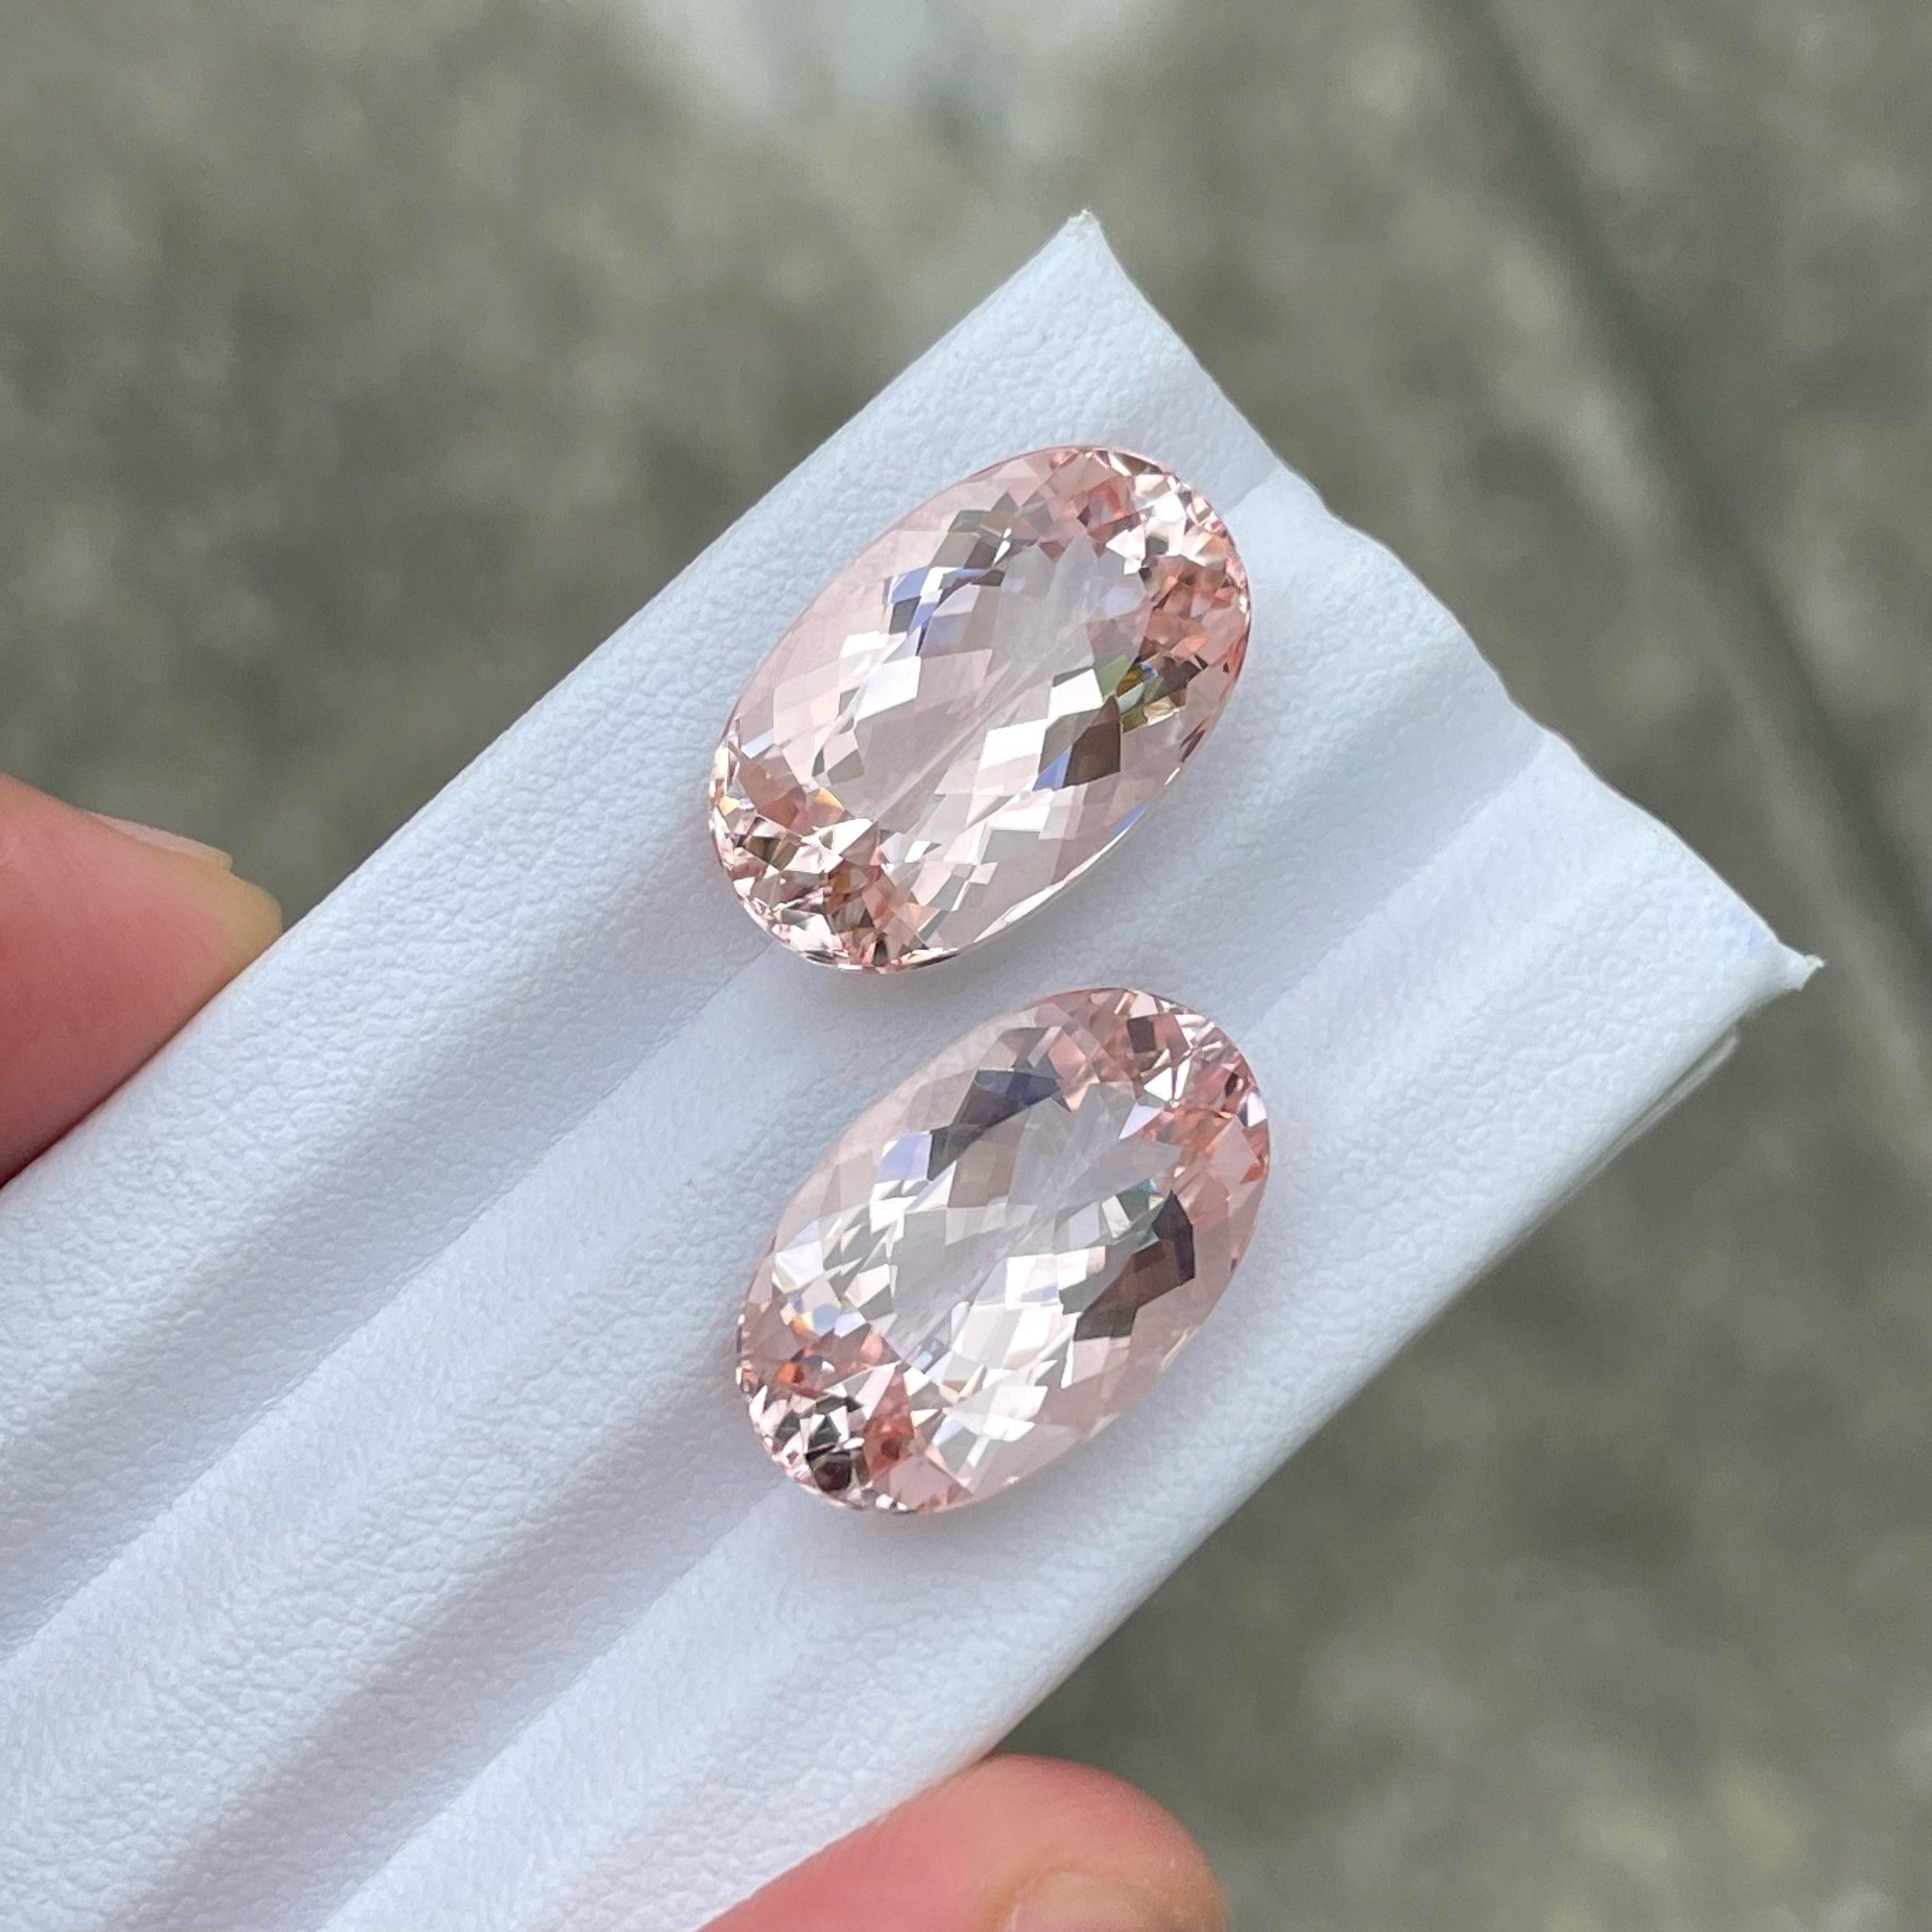 Peachy Pink Natural Morganite Gemstone Pair of 23.60 carats from Nigeria has a wonderful cut in a Oval shape, incredible Peachy Pink color. Great brilliance. This gem is  Loupe-clean.

Light Pink Natural Morganite Stone For Ring